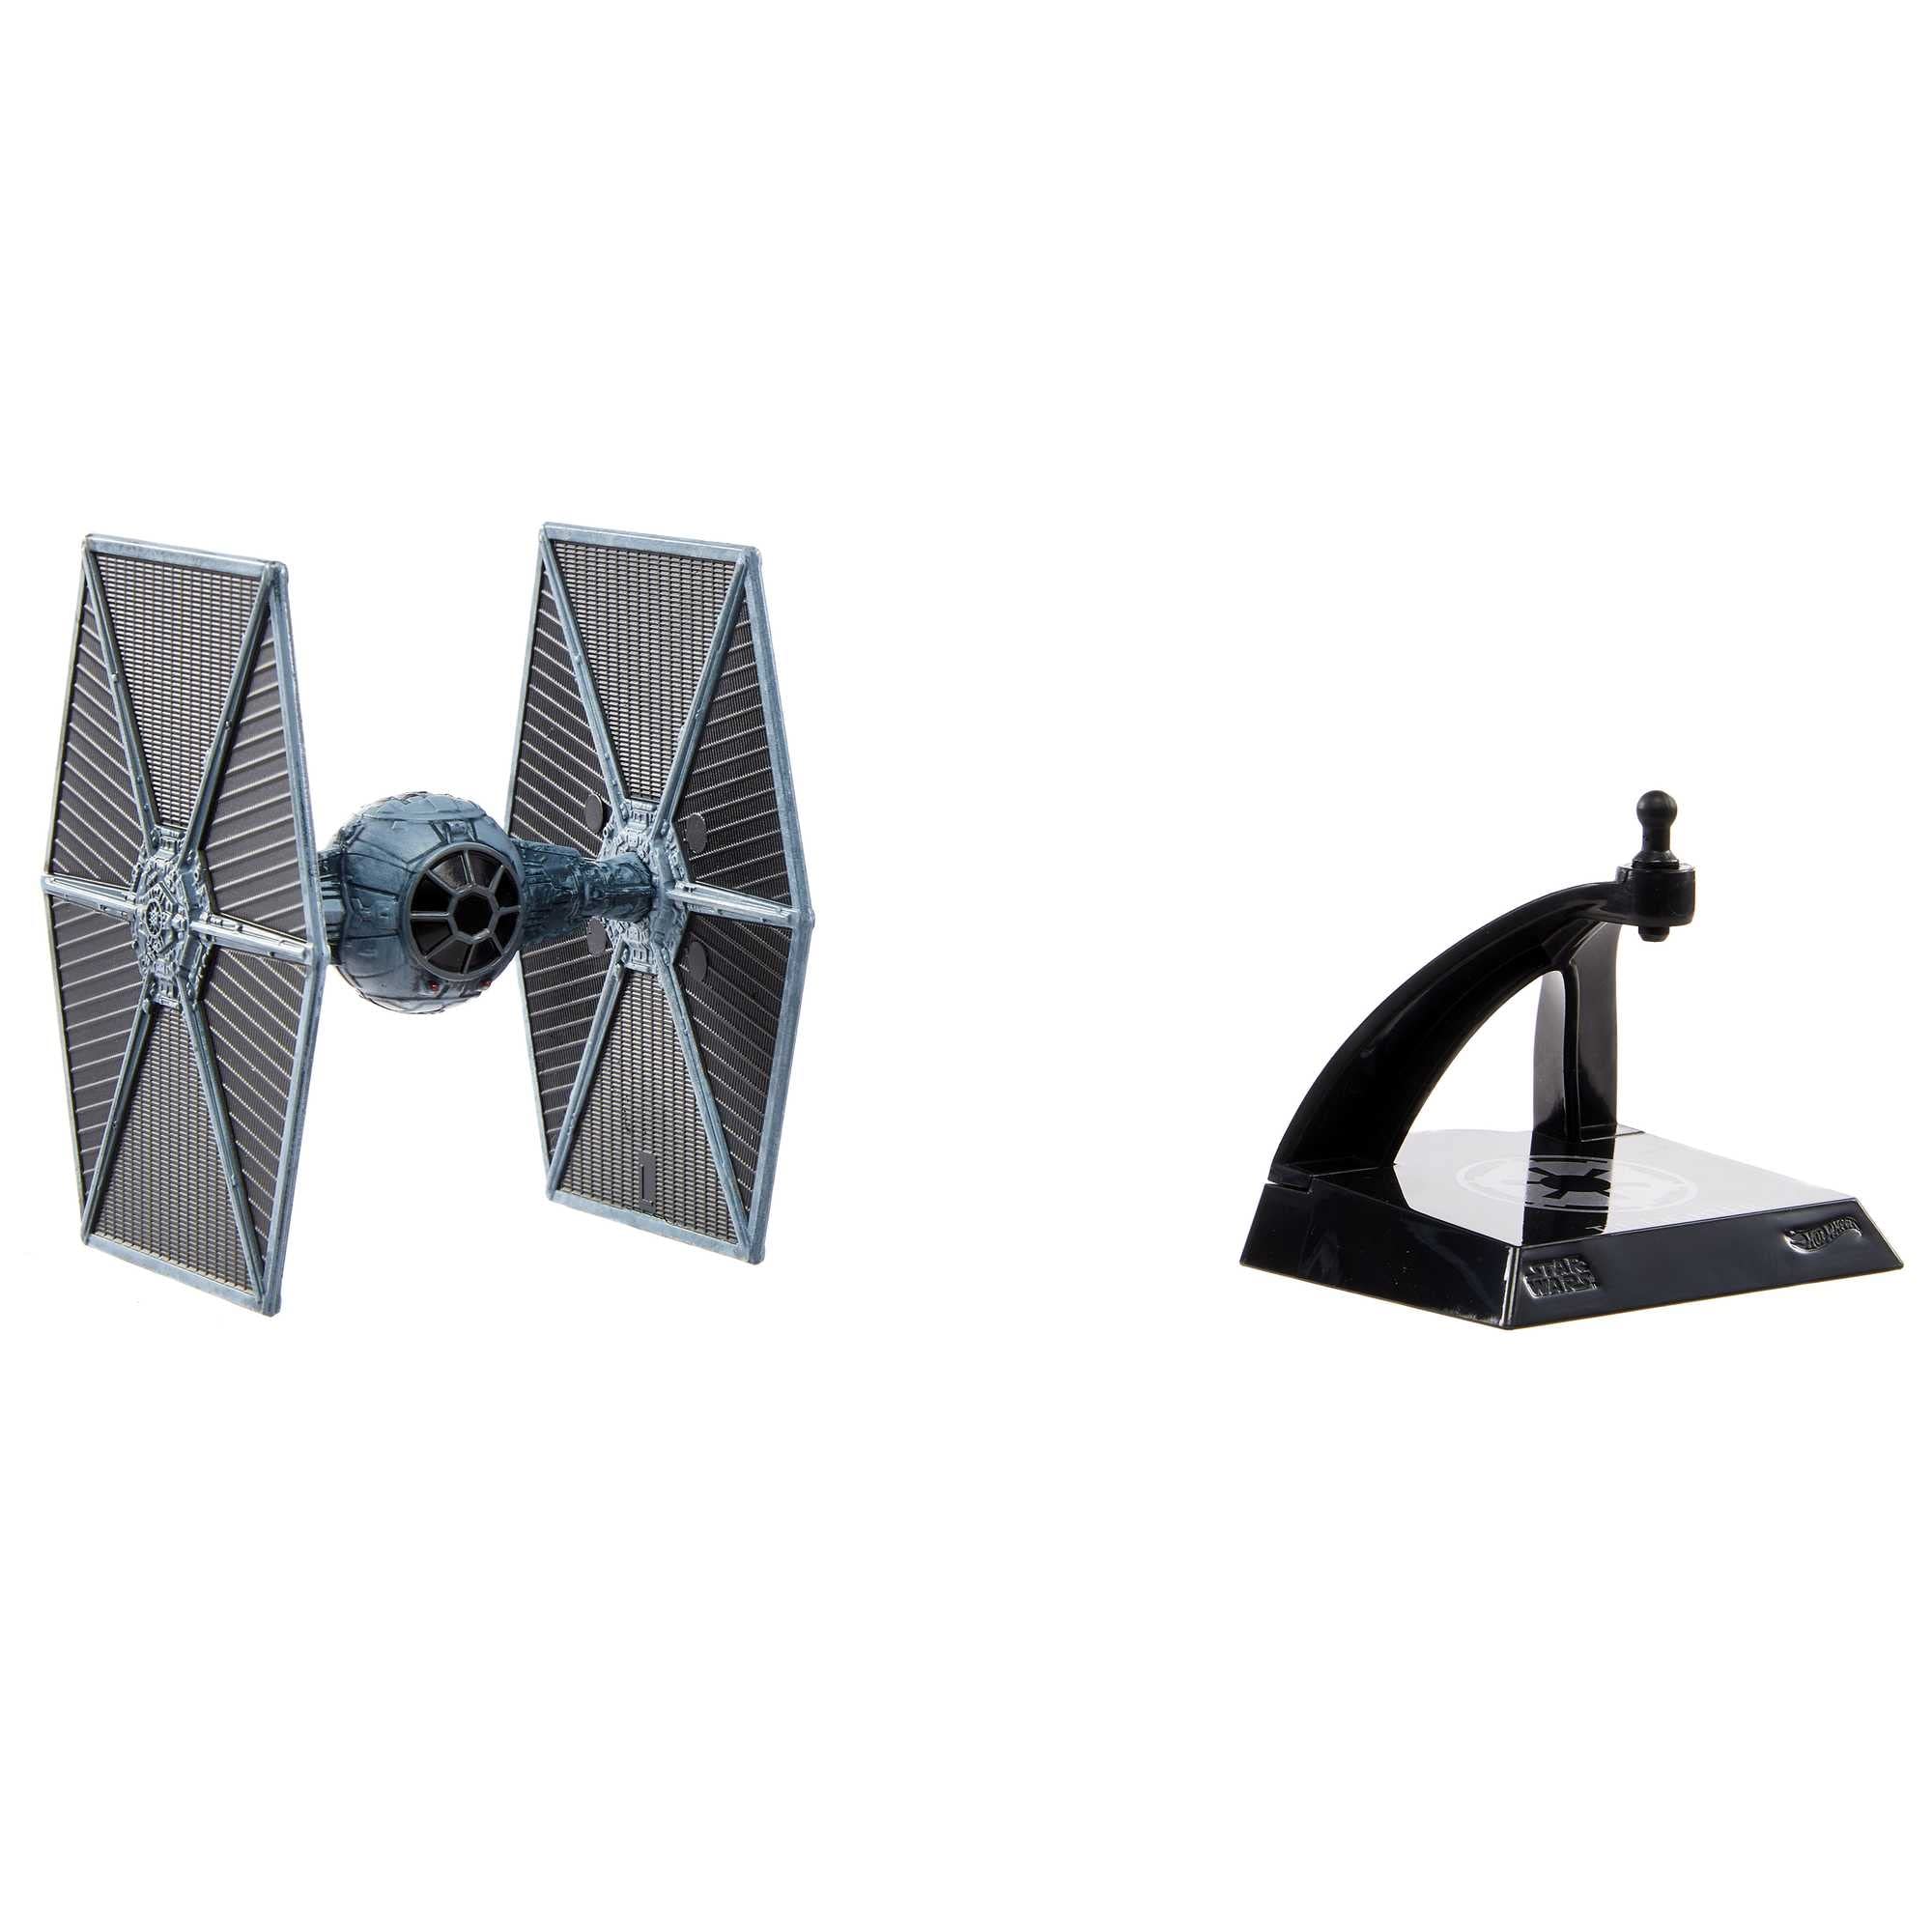 Hot Wheels Star Wars Starships Select, Premium Replica of Tie Fighter, Moveable Parts, Premium Stand, Gift for Adult Collectors, 1:50 Scale